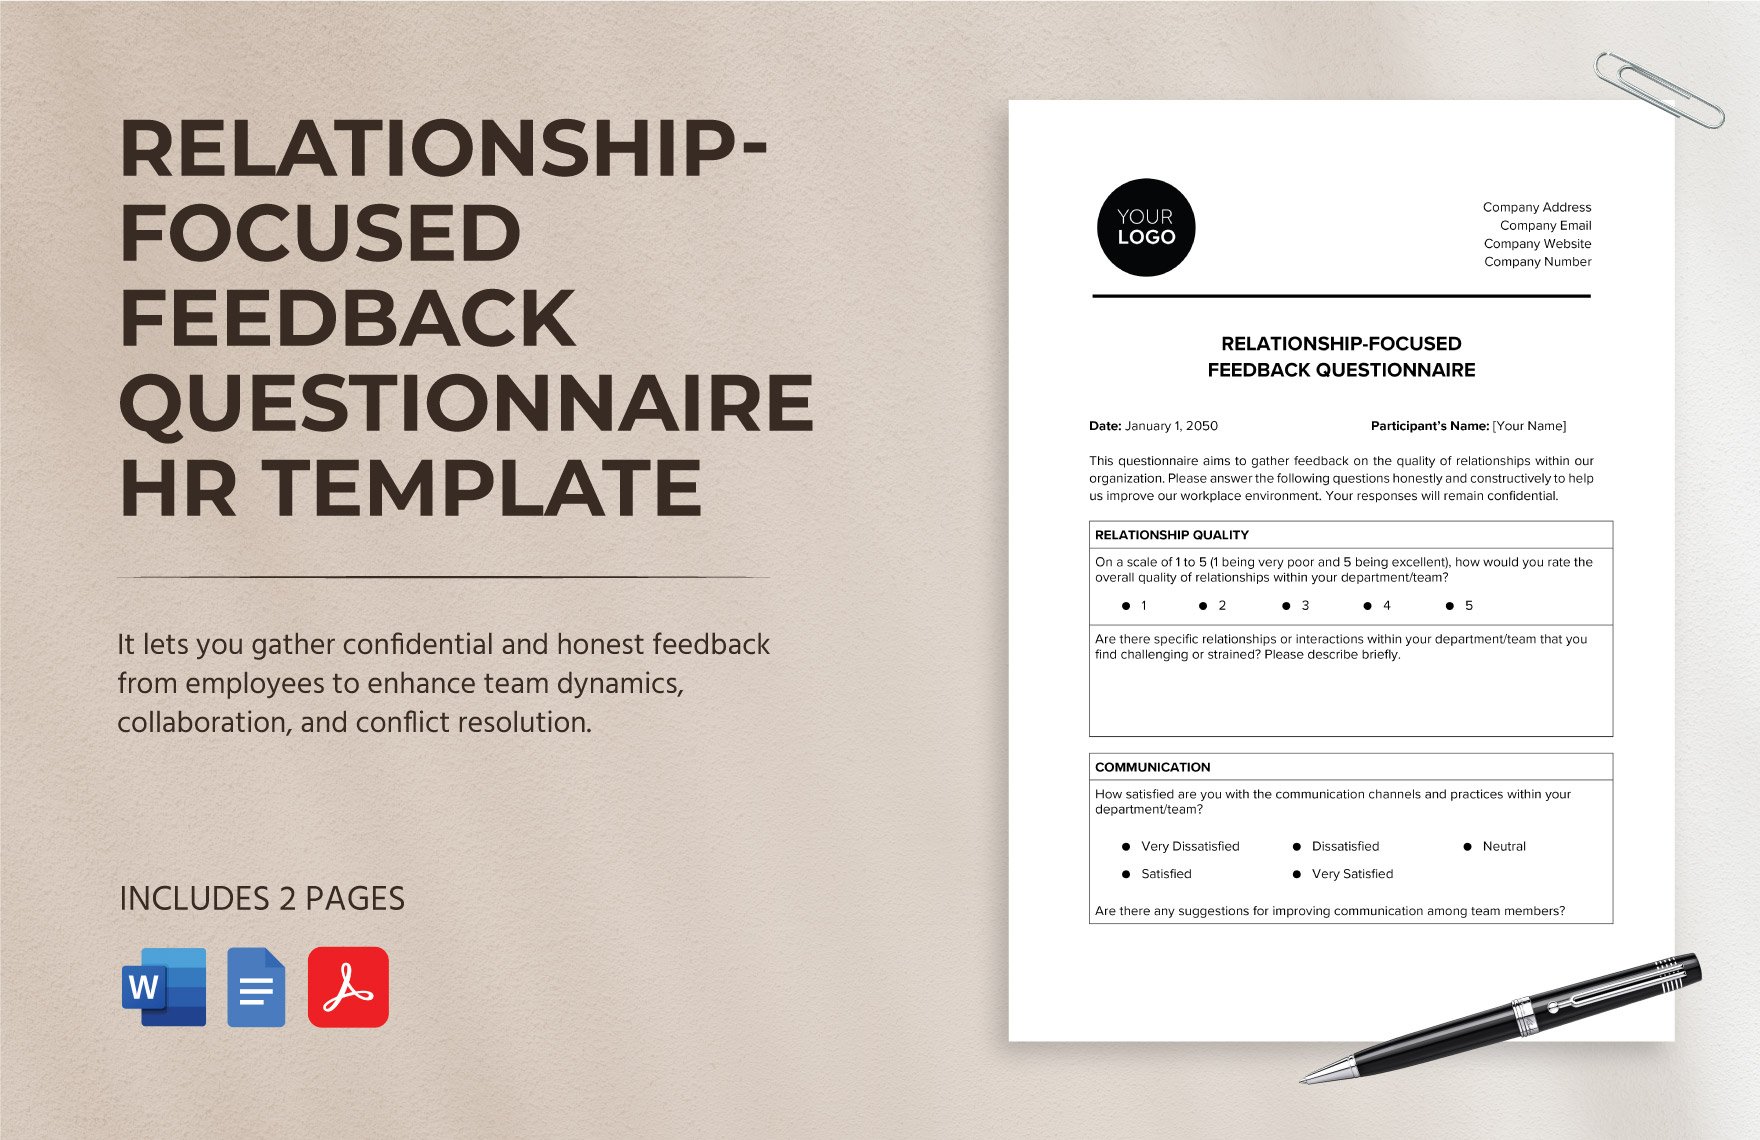 Relationship-focused Feedback Questionnaire HR Template in Word, Google Docs, PDF